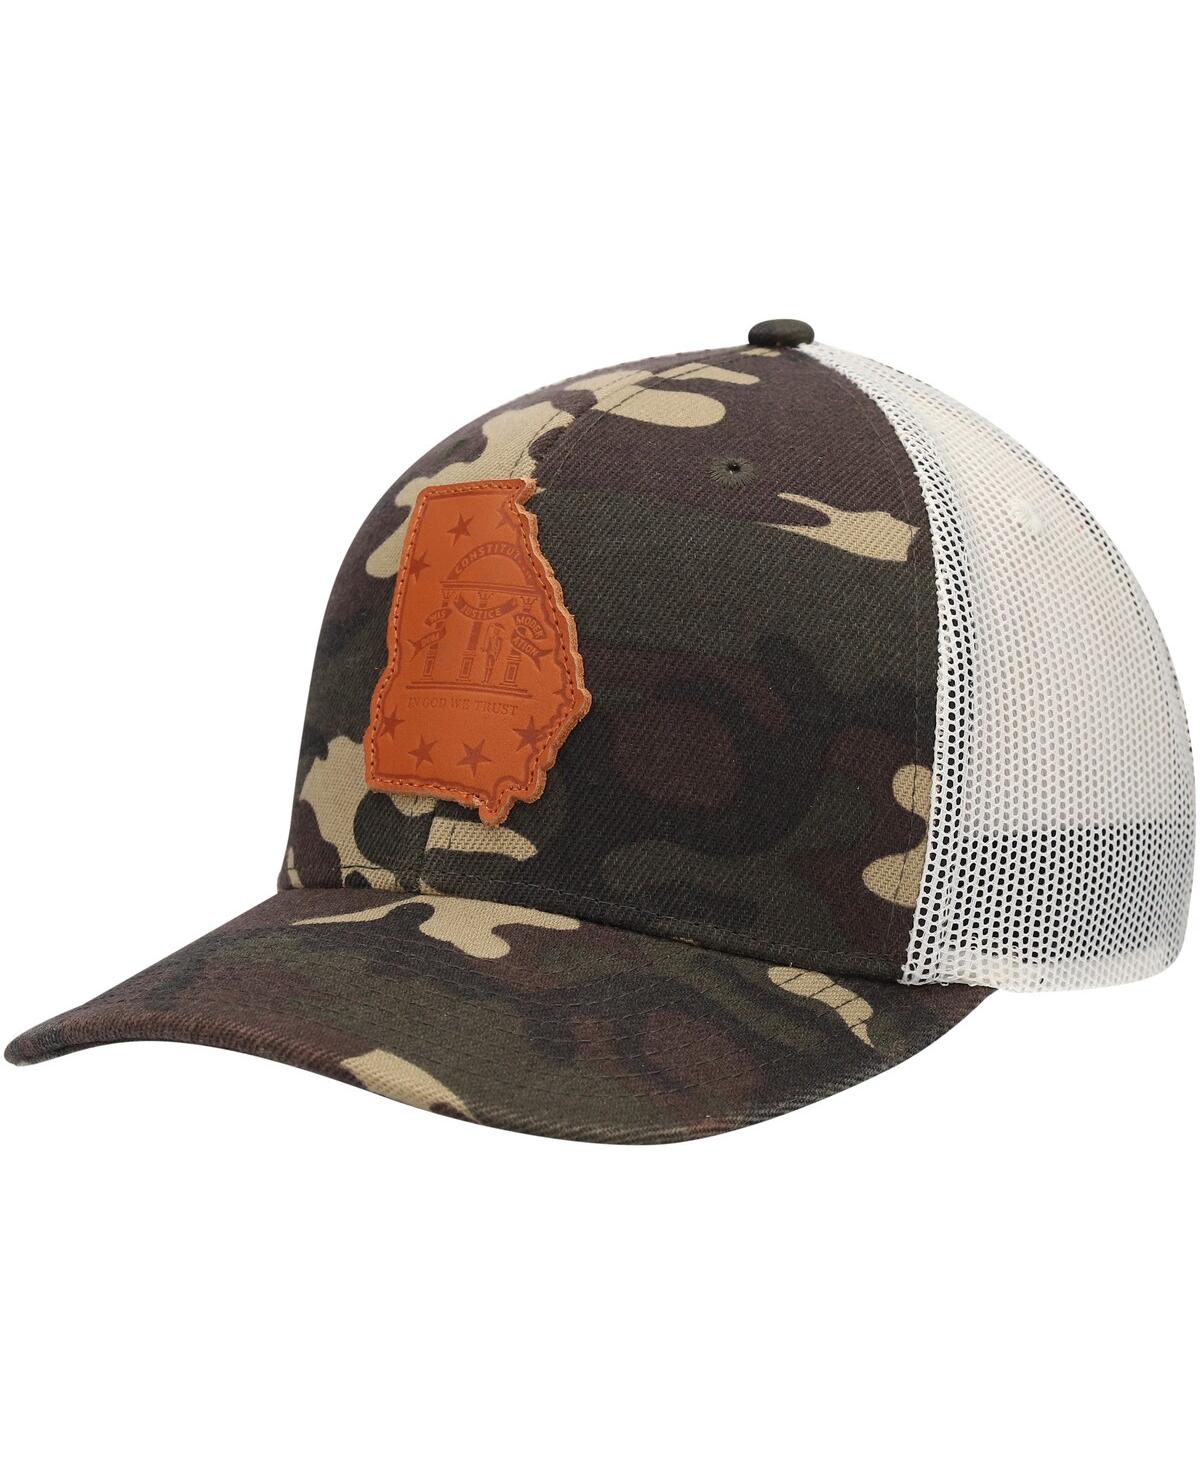 Shop Local Crowns Men's  Camo Georgia Icon Woodland State Patch Trucker Snapback Hat